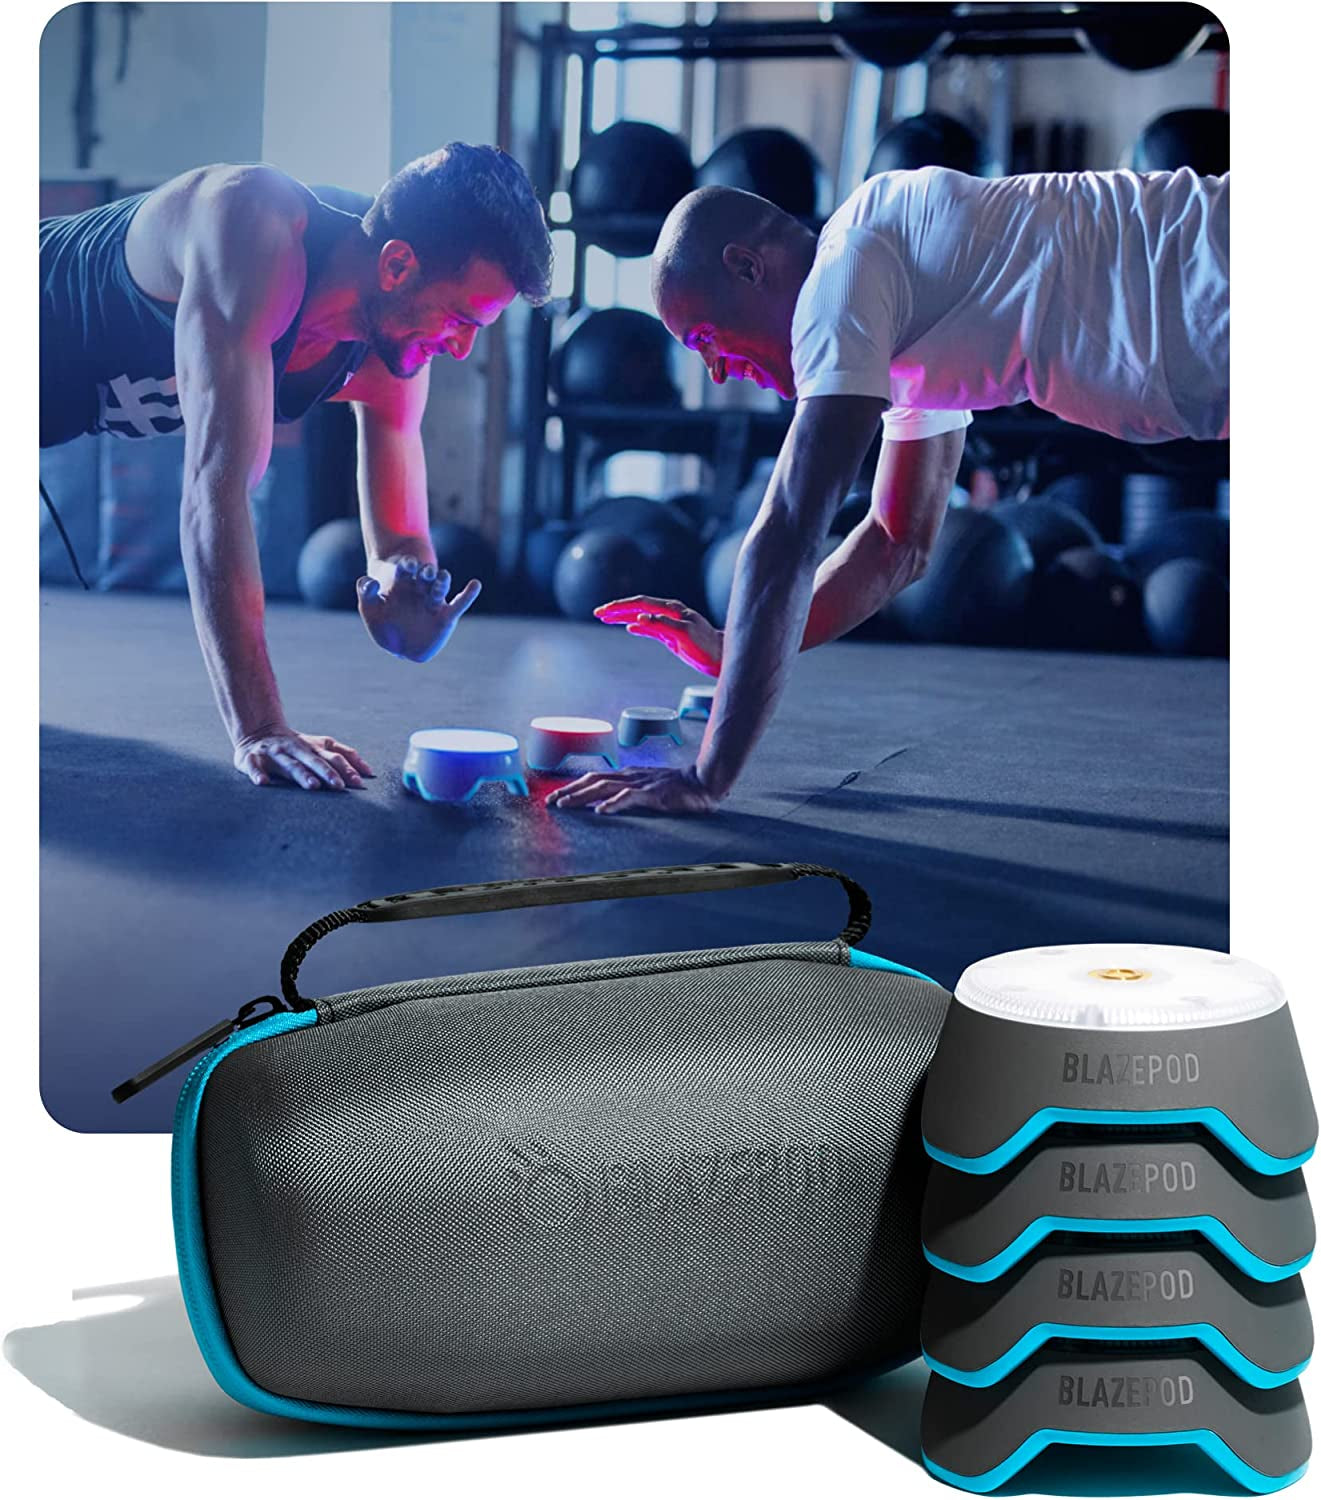 Reaction Training Platform Improves Reaction Time and Agility for Athletes, Trainers, Coaches, Physical & Neurological Therapists, Fitness Trainers, Physical Educators